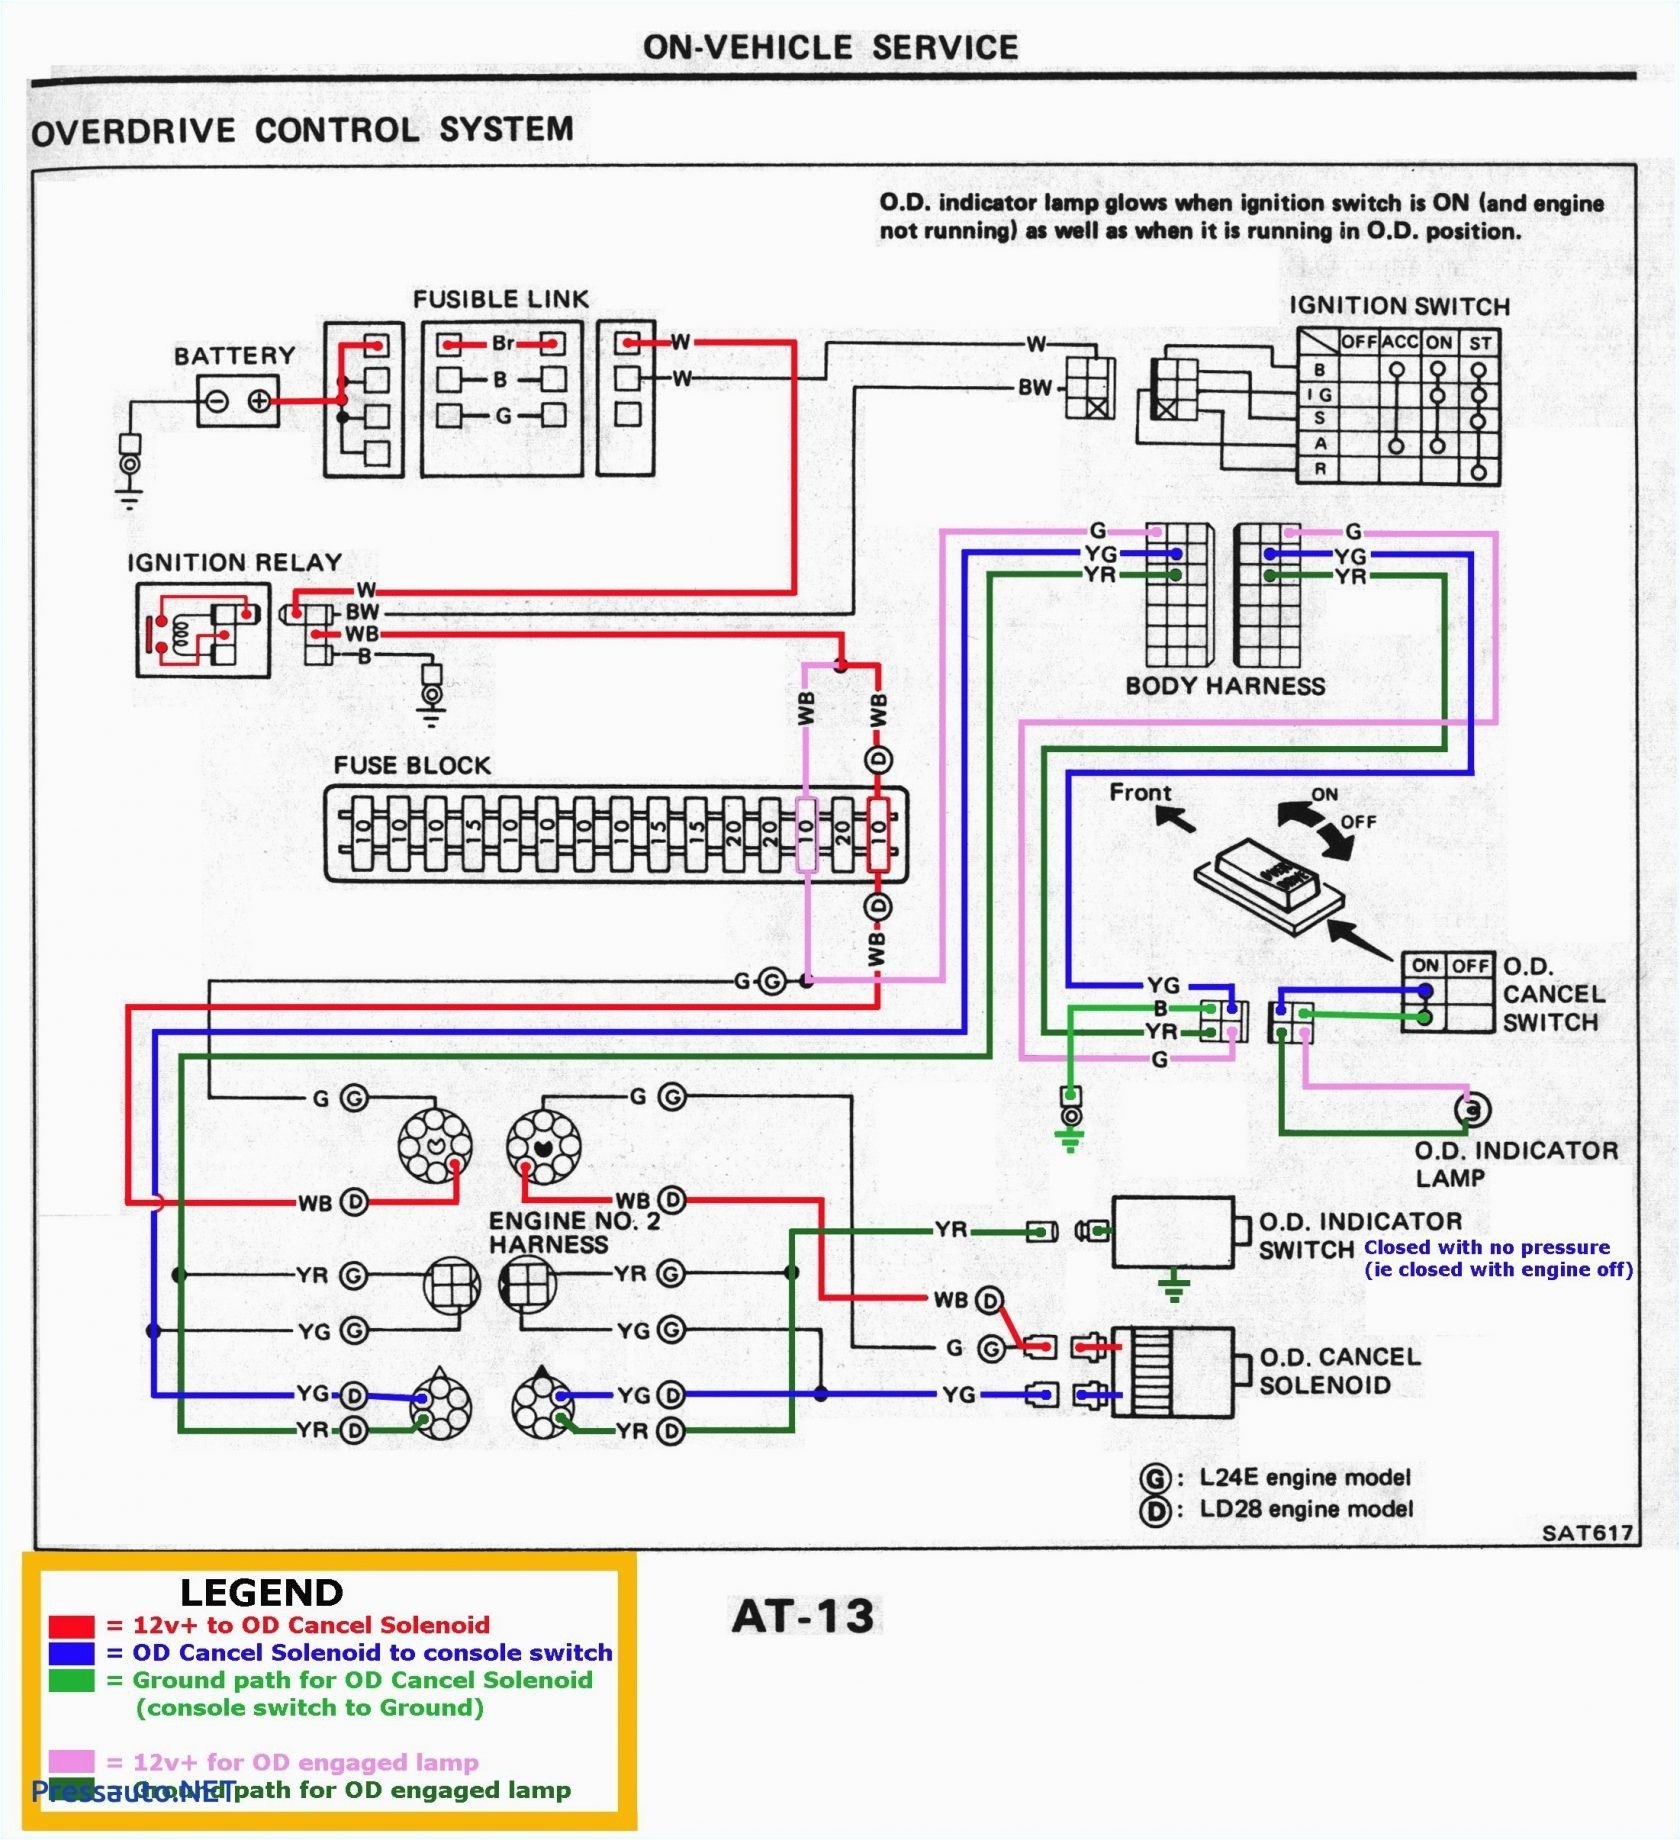 wiring diagram in addition power window for schema wiring diagram2006 bmw x3 fuse box wiring diagram